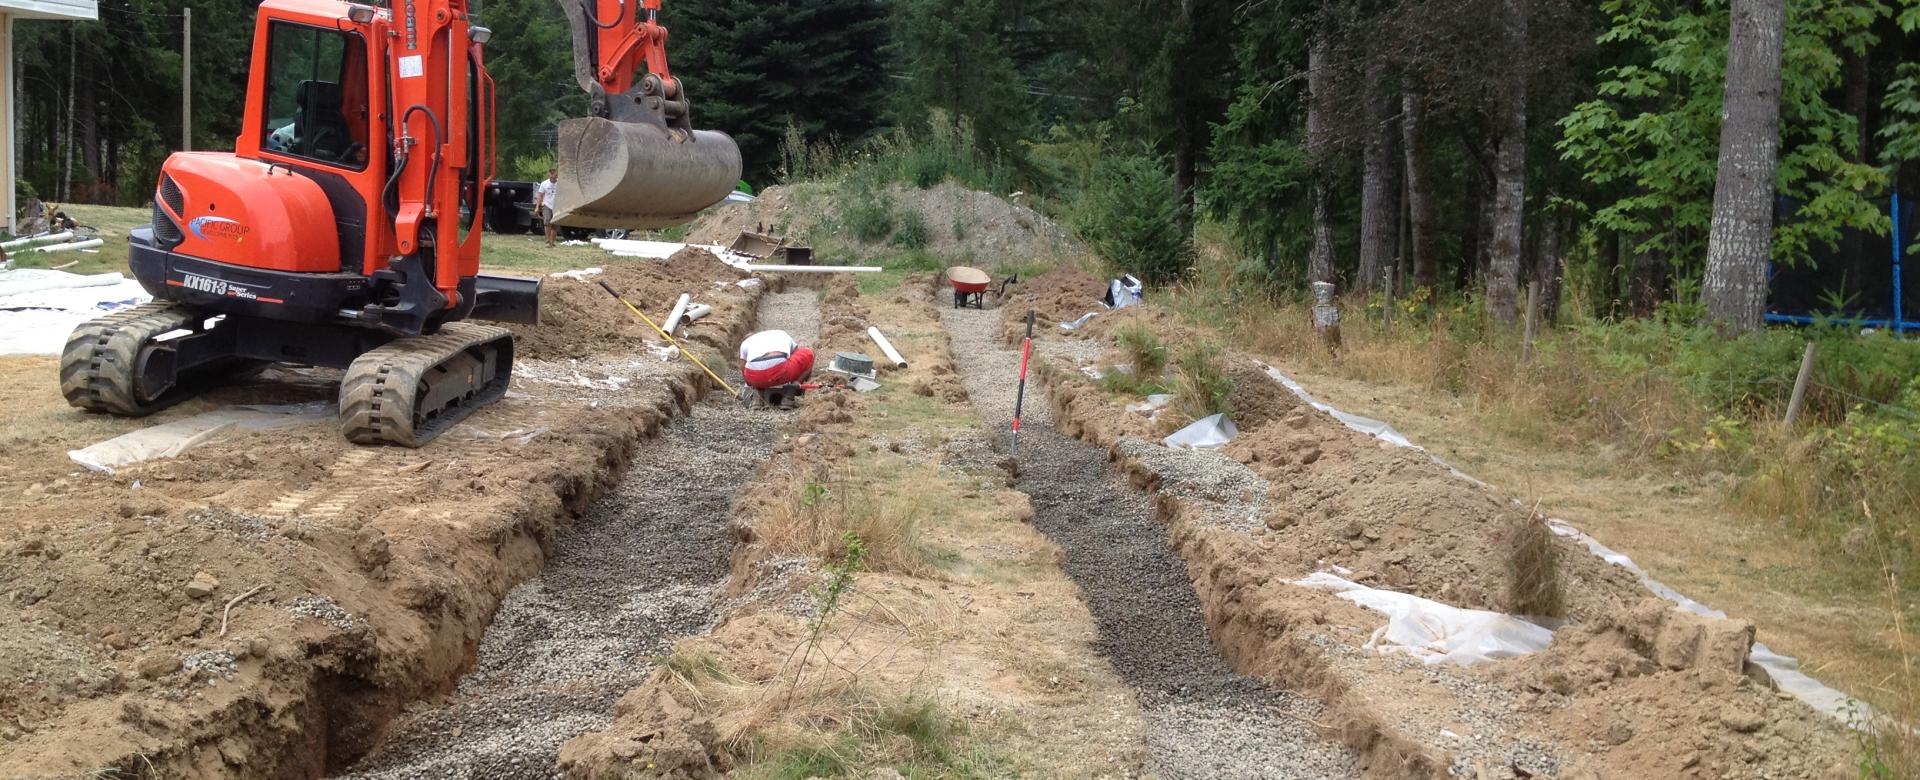 Septic Field Victoria, Duncan BC Pacific Group Developments